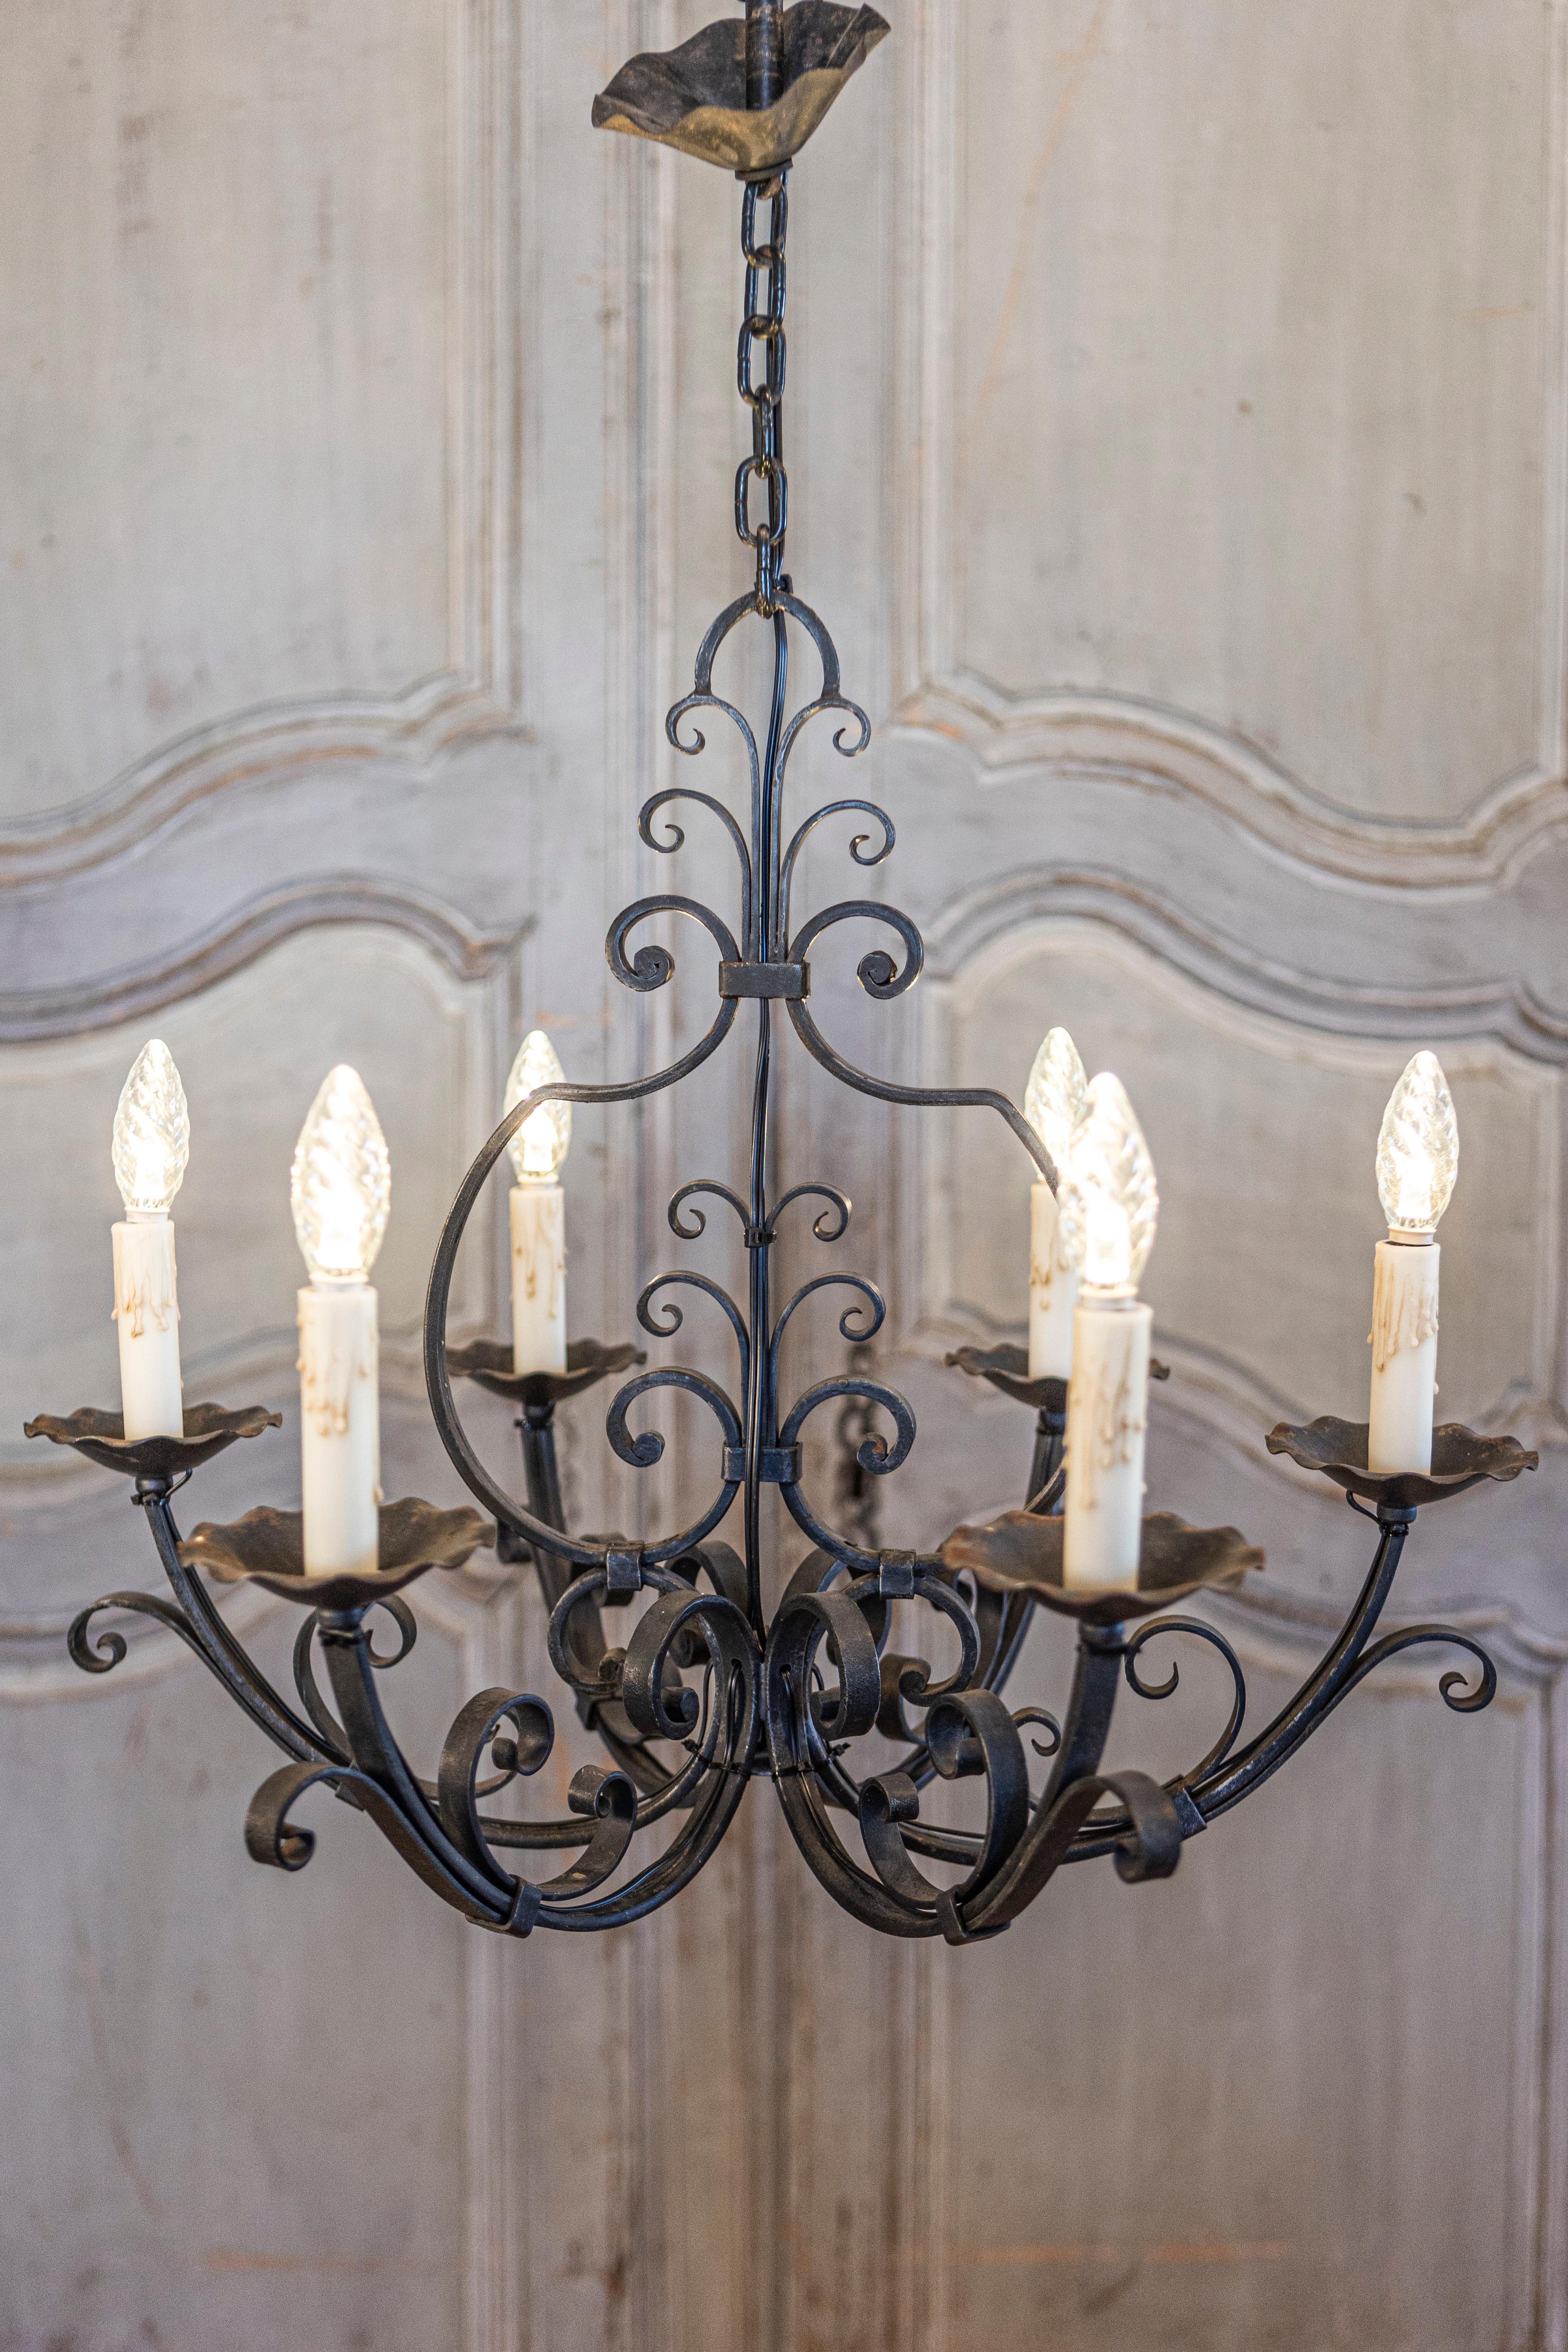 A French wrought iron chandelier from the 20th century with six lights and scrolling motifs, professionally rewired for the USA. This exquisite French wrought iron chandelier from the 20th century embodies elegance and intricate craftsmanship.